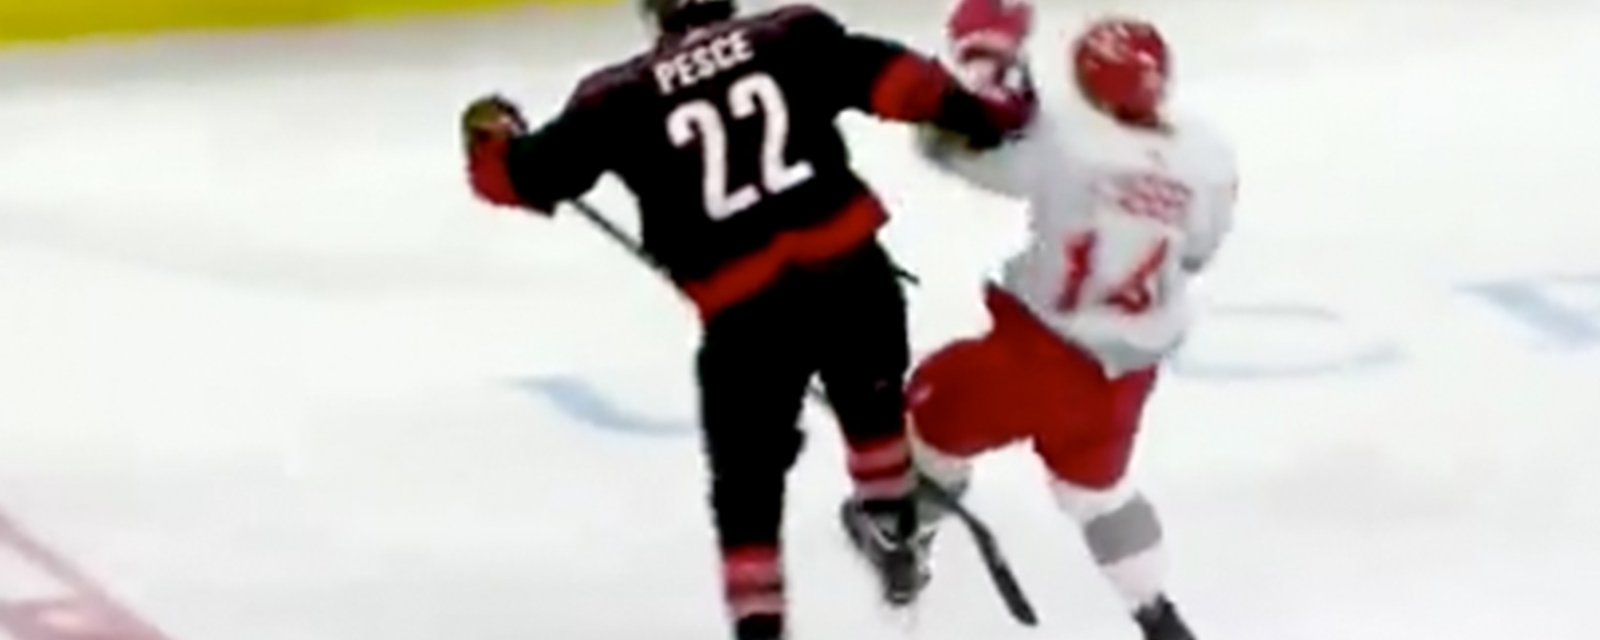 Brett Pesce with probably the most blatant slew-foot in NHL history